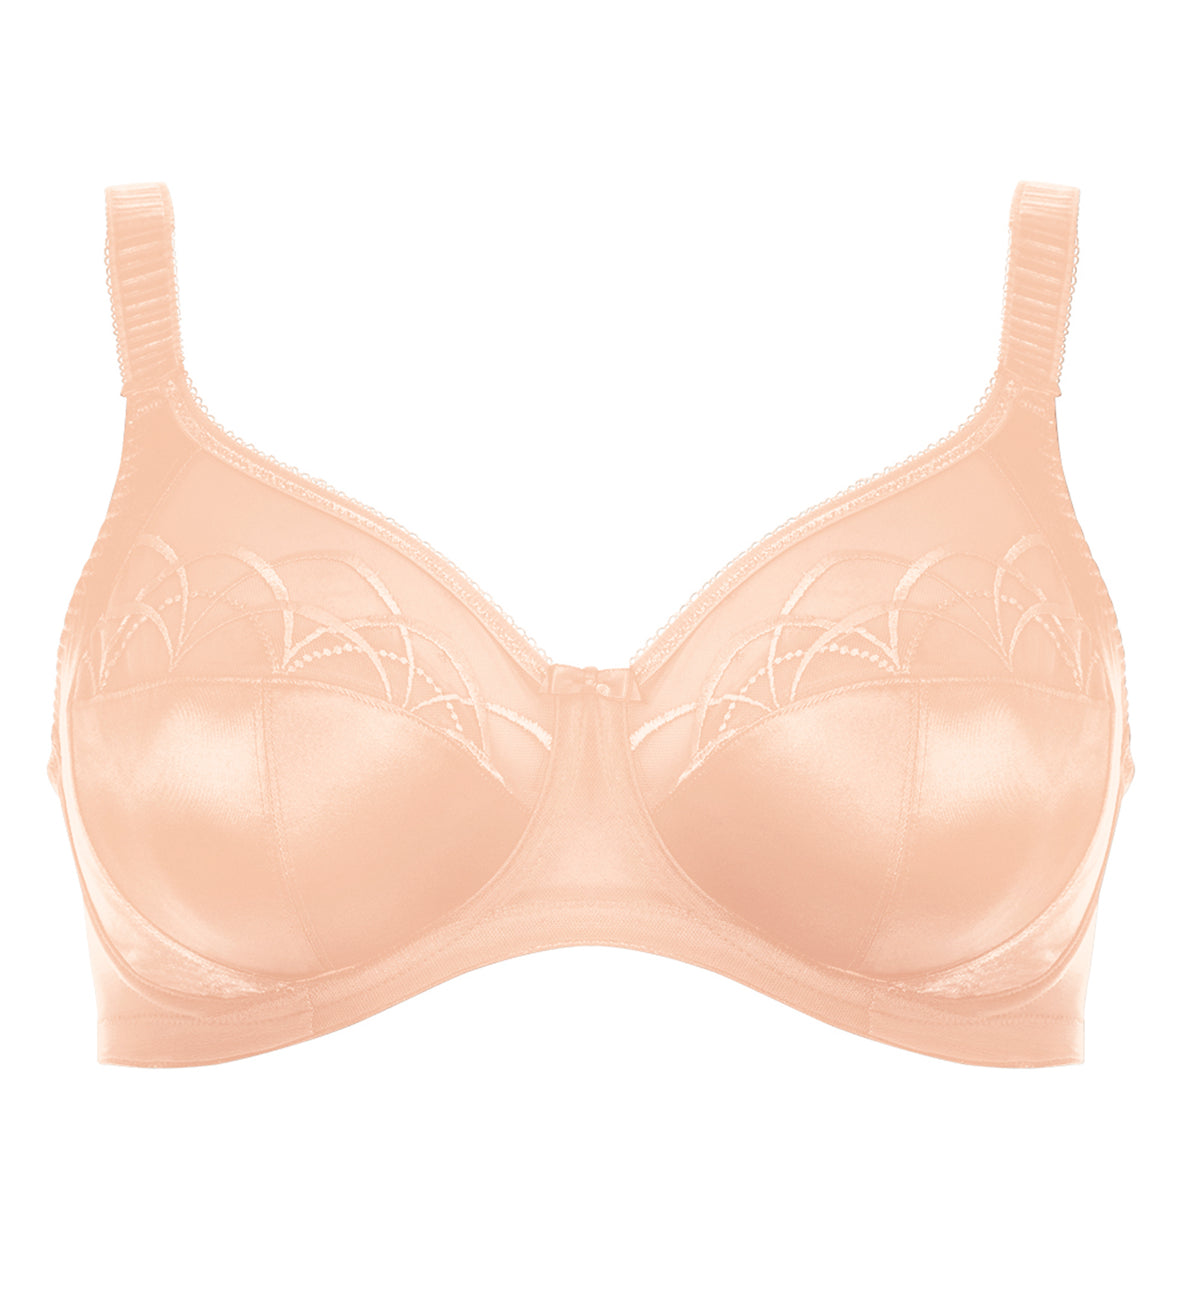 Elomi Cate Embroidered Full Cup Banded Underwire Bra (4030),34H,Latte - Latte,34H